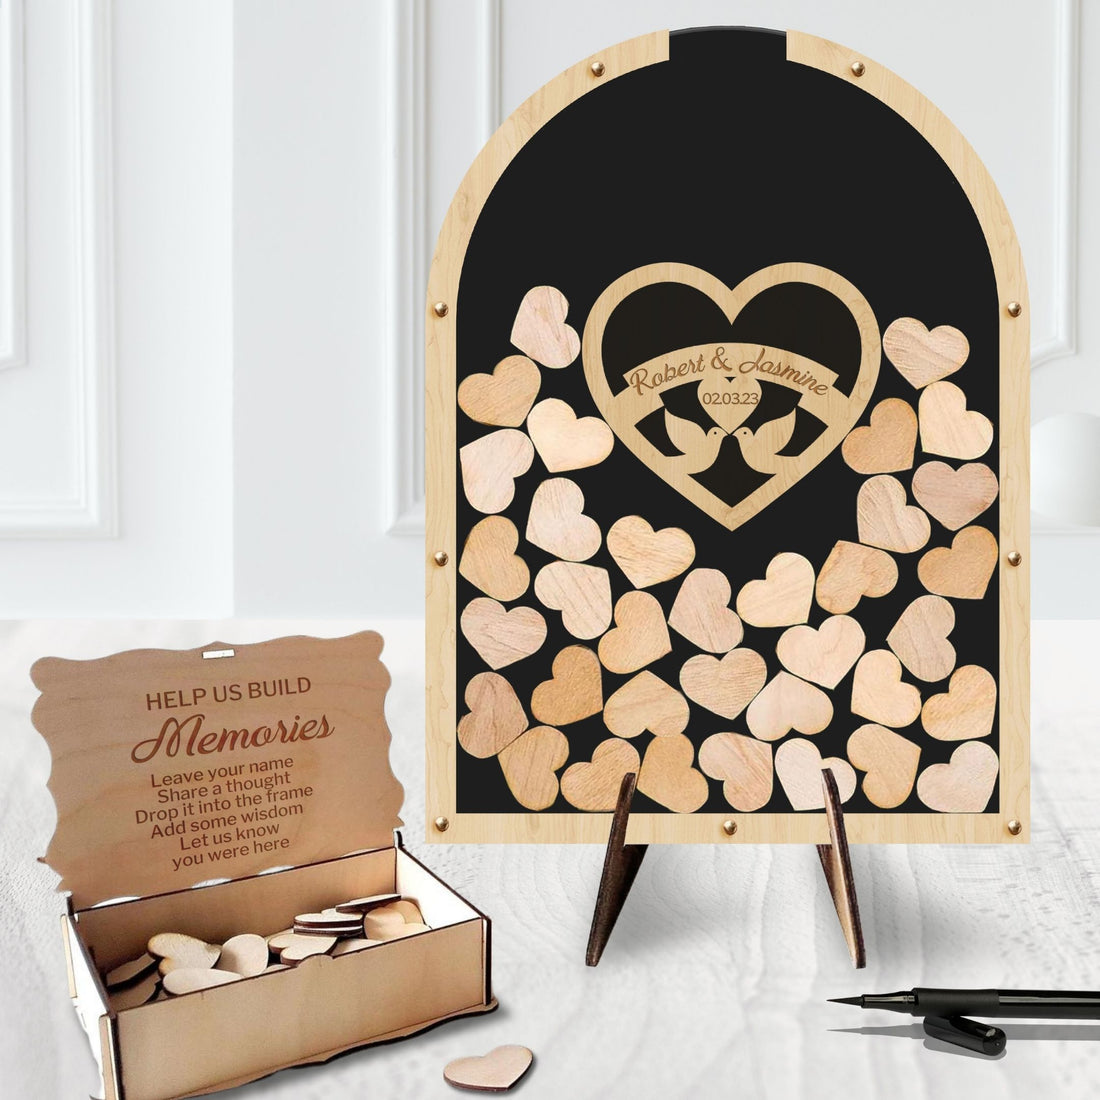 Custom Made Plywood & Acrylic Arch Shape Wedding Heart Chips Drop Box, Rustic Personalised Guest Book Alternative, Stationery Table Decor